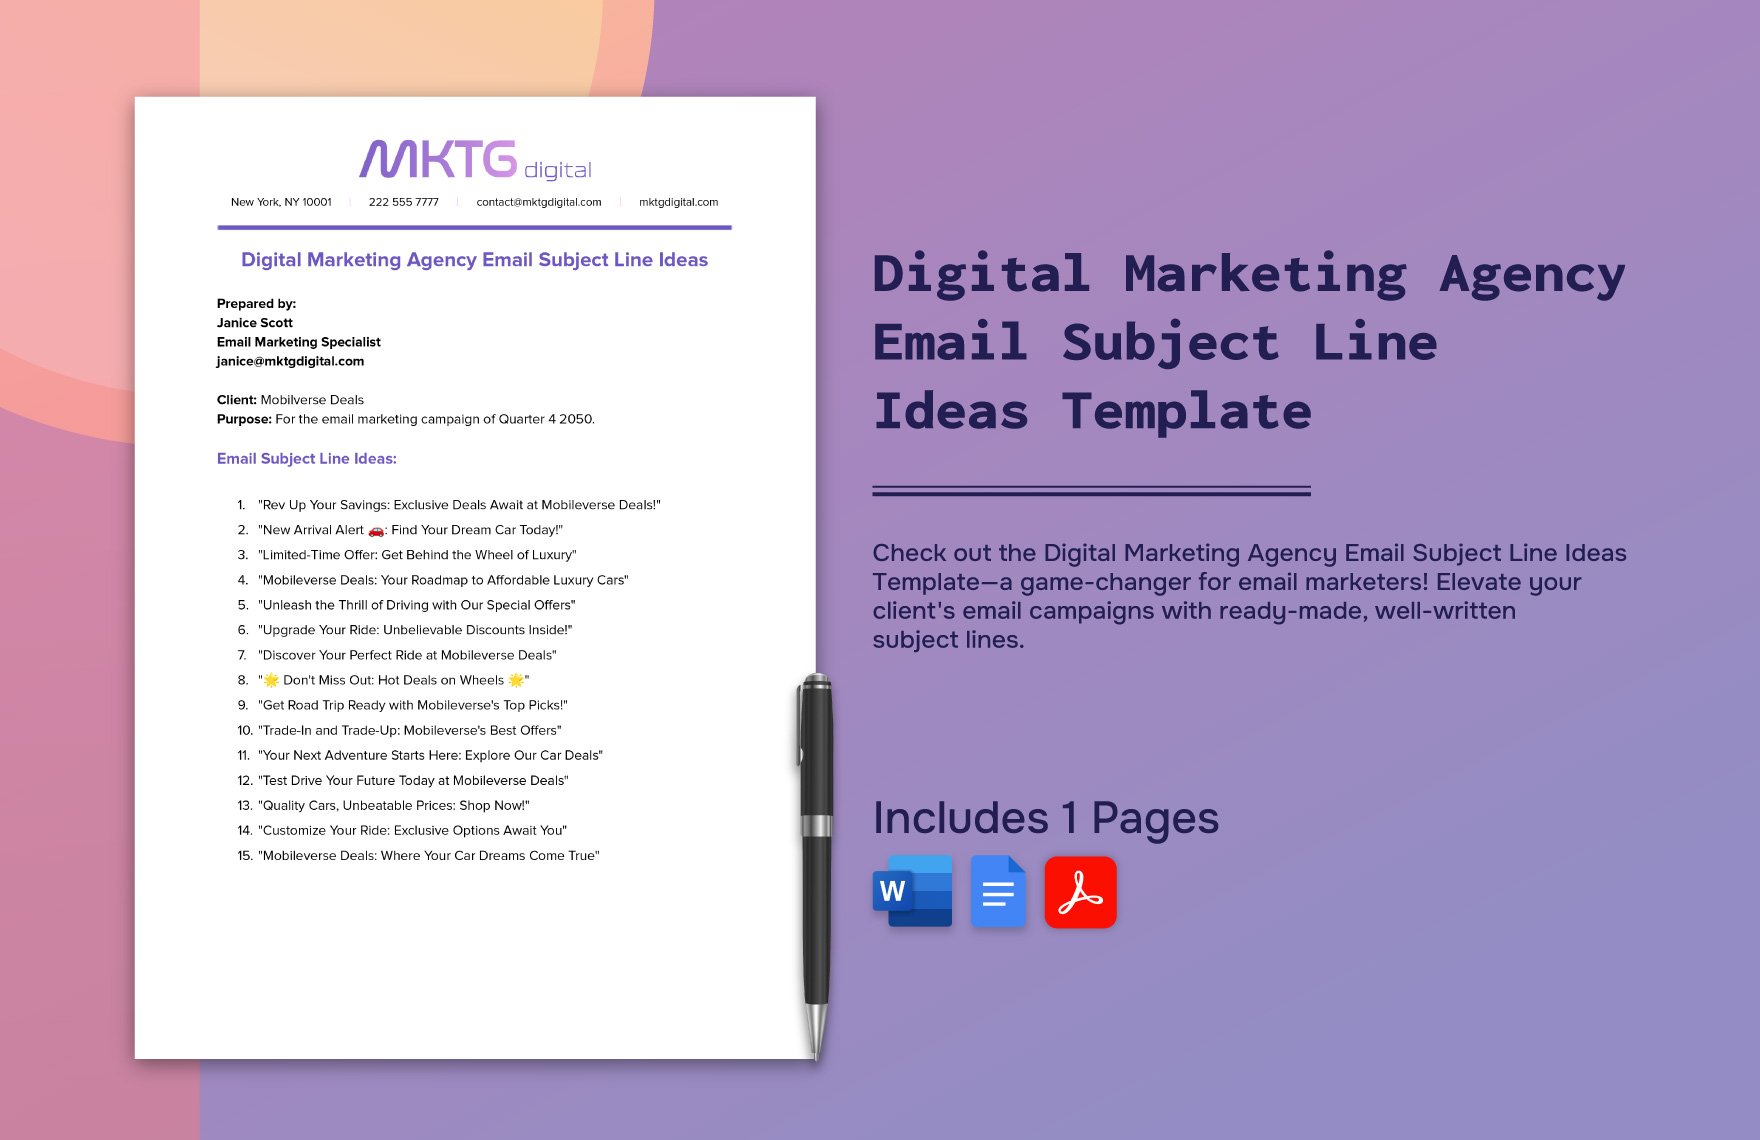 Free Digital Marketing Agency Email Subject Line Ideas Template in Word, Google Docs, PDF